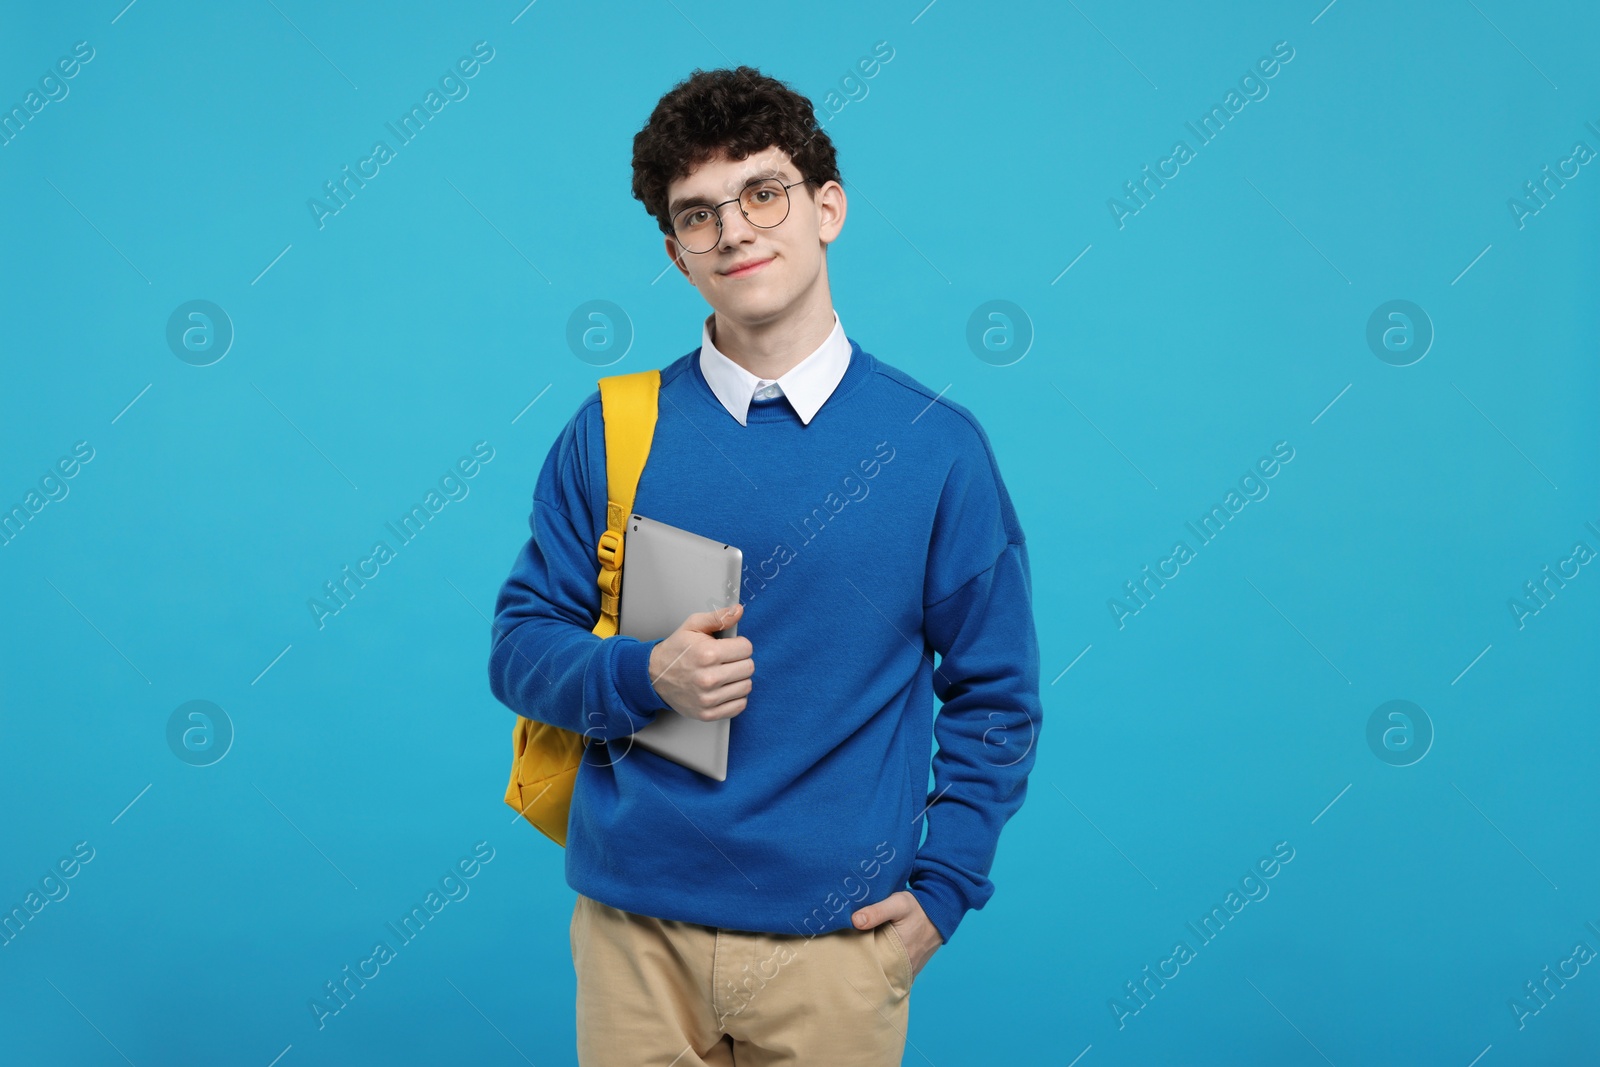 Photo of Portrait of student with backpack and tablet on light blue background